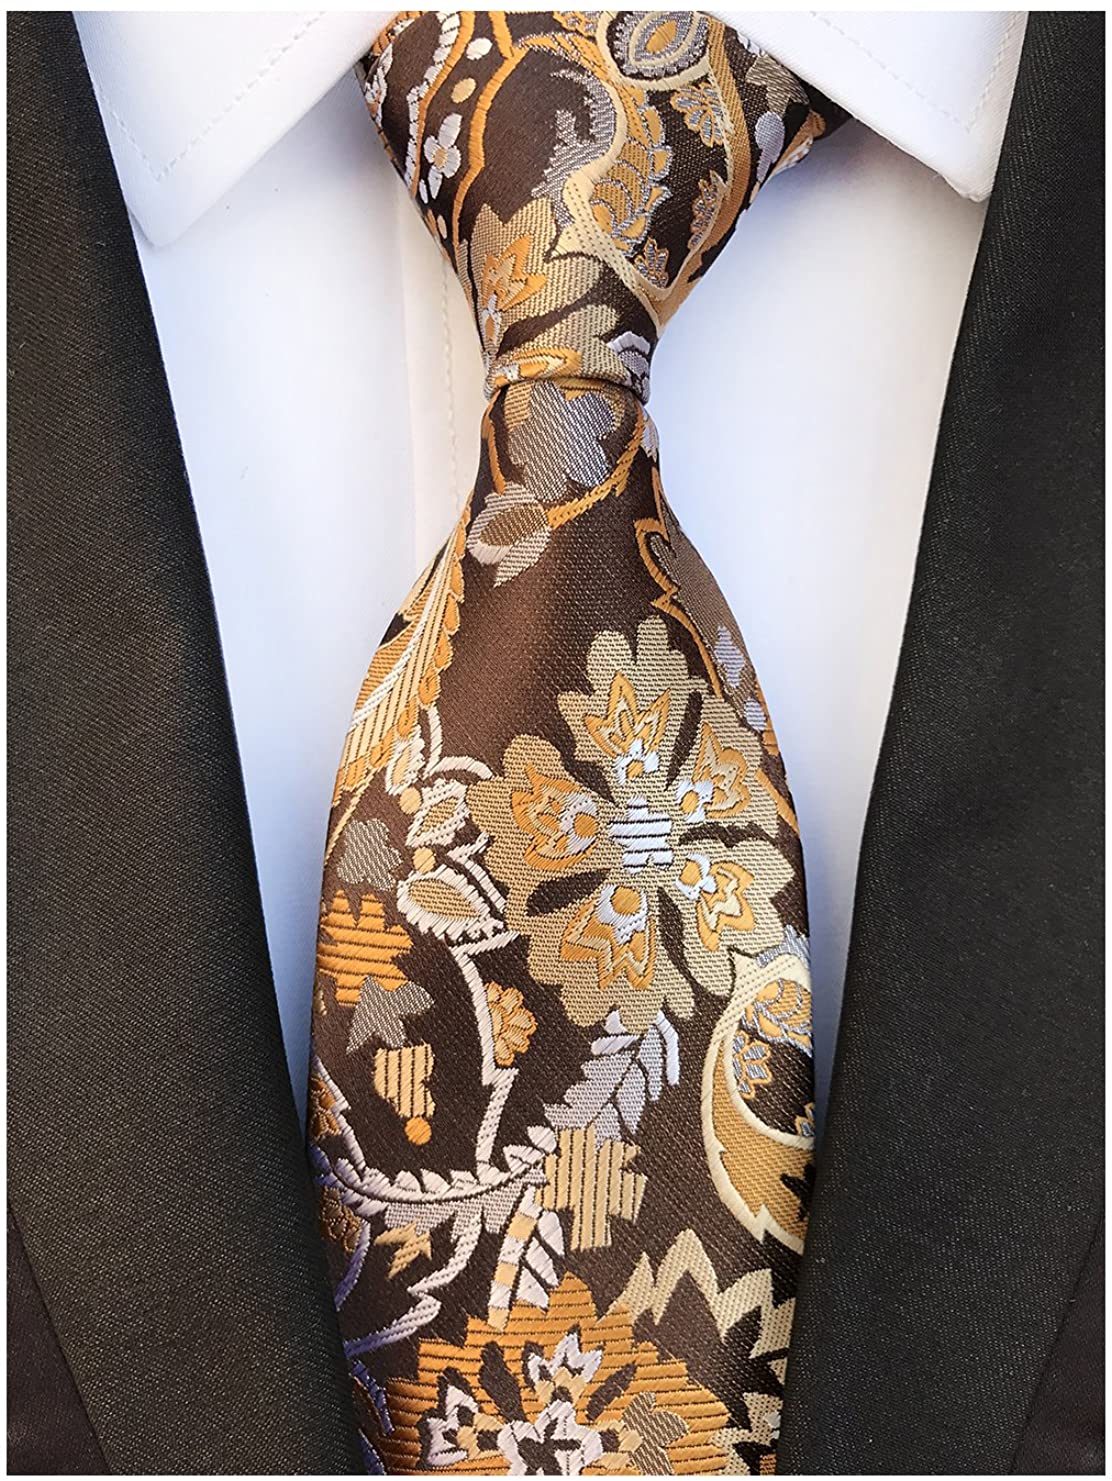 Details about   Elfeves Men's Peony Floral Ties Jacquard Woven Luxury Formal Party Suit Neckties 